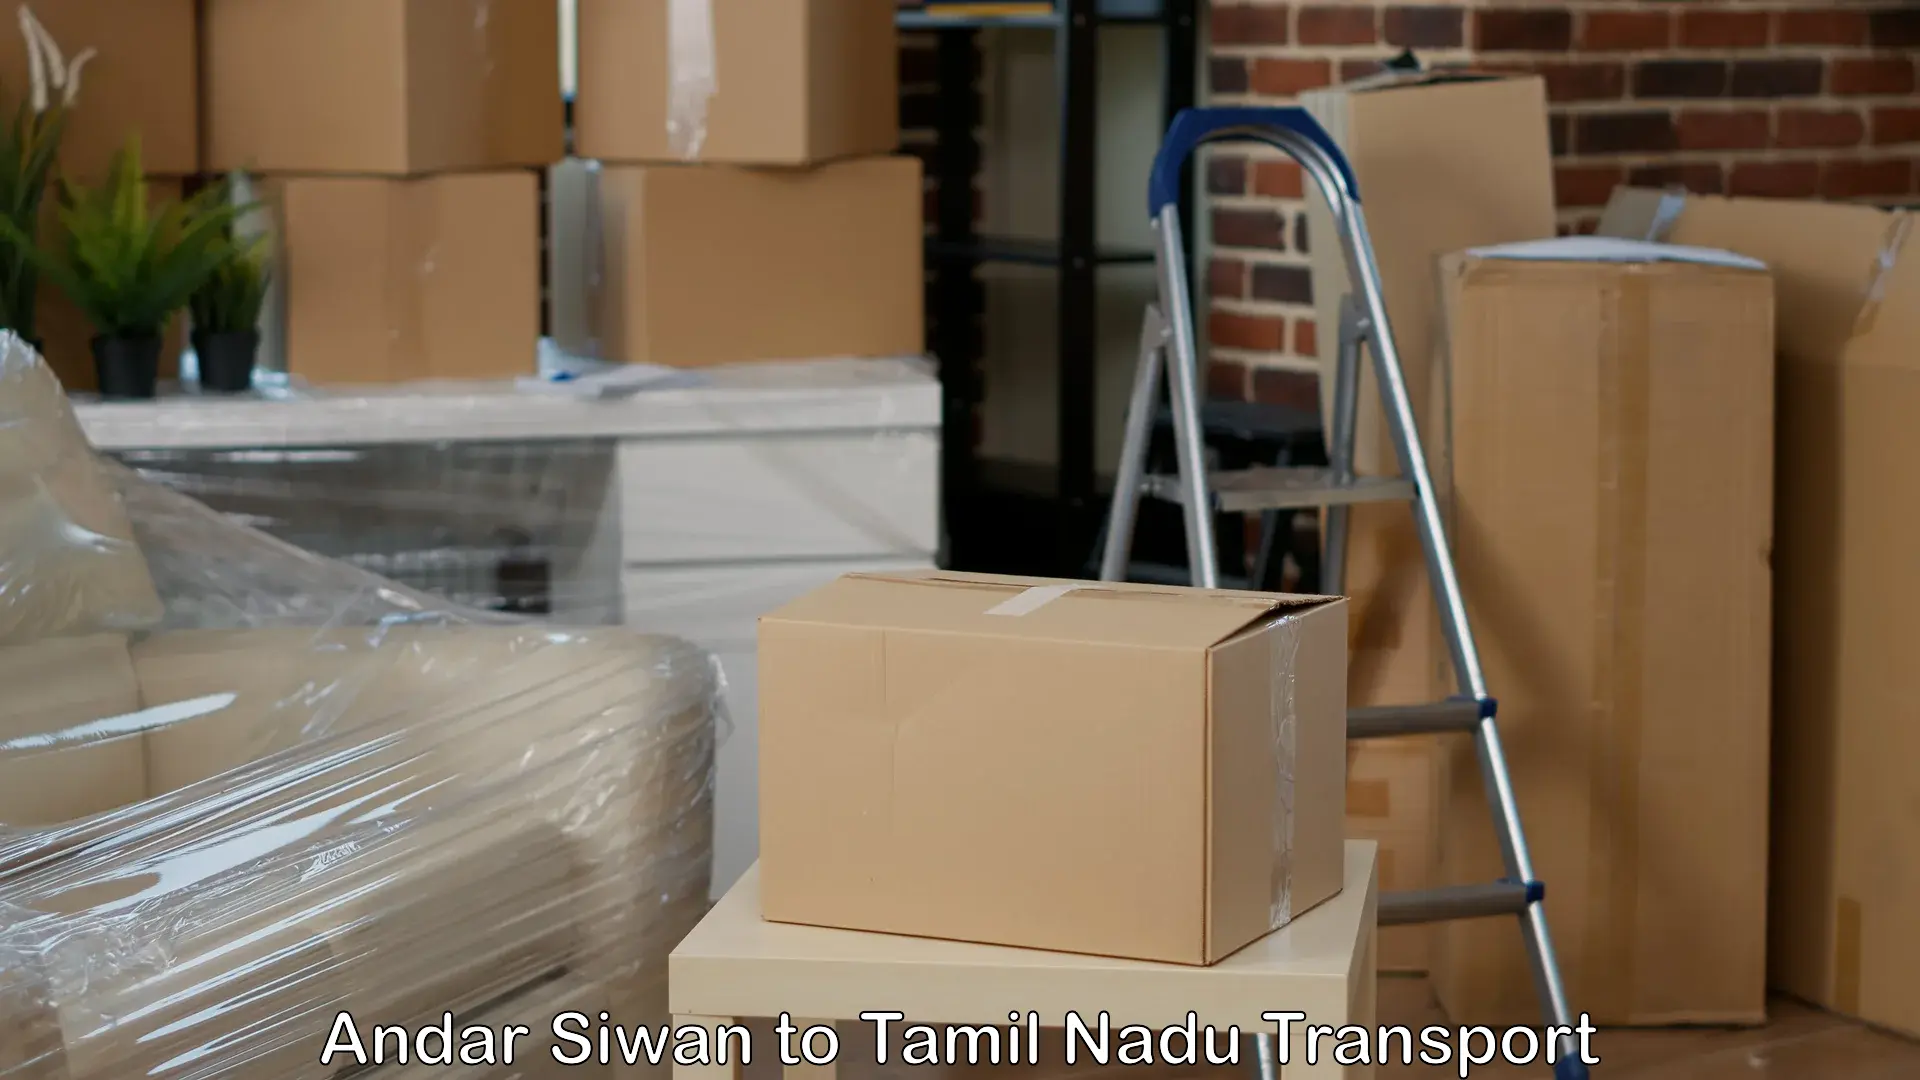 India truck logistics services Andar Siwan to Chennai